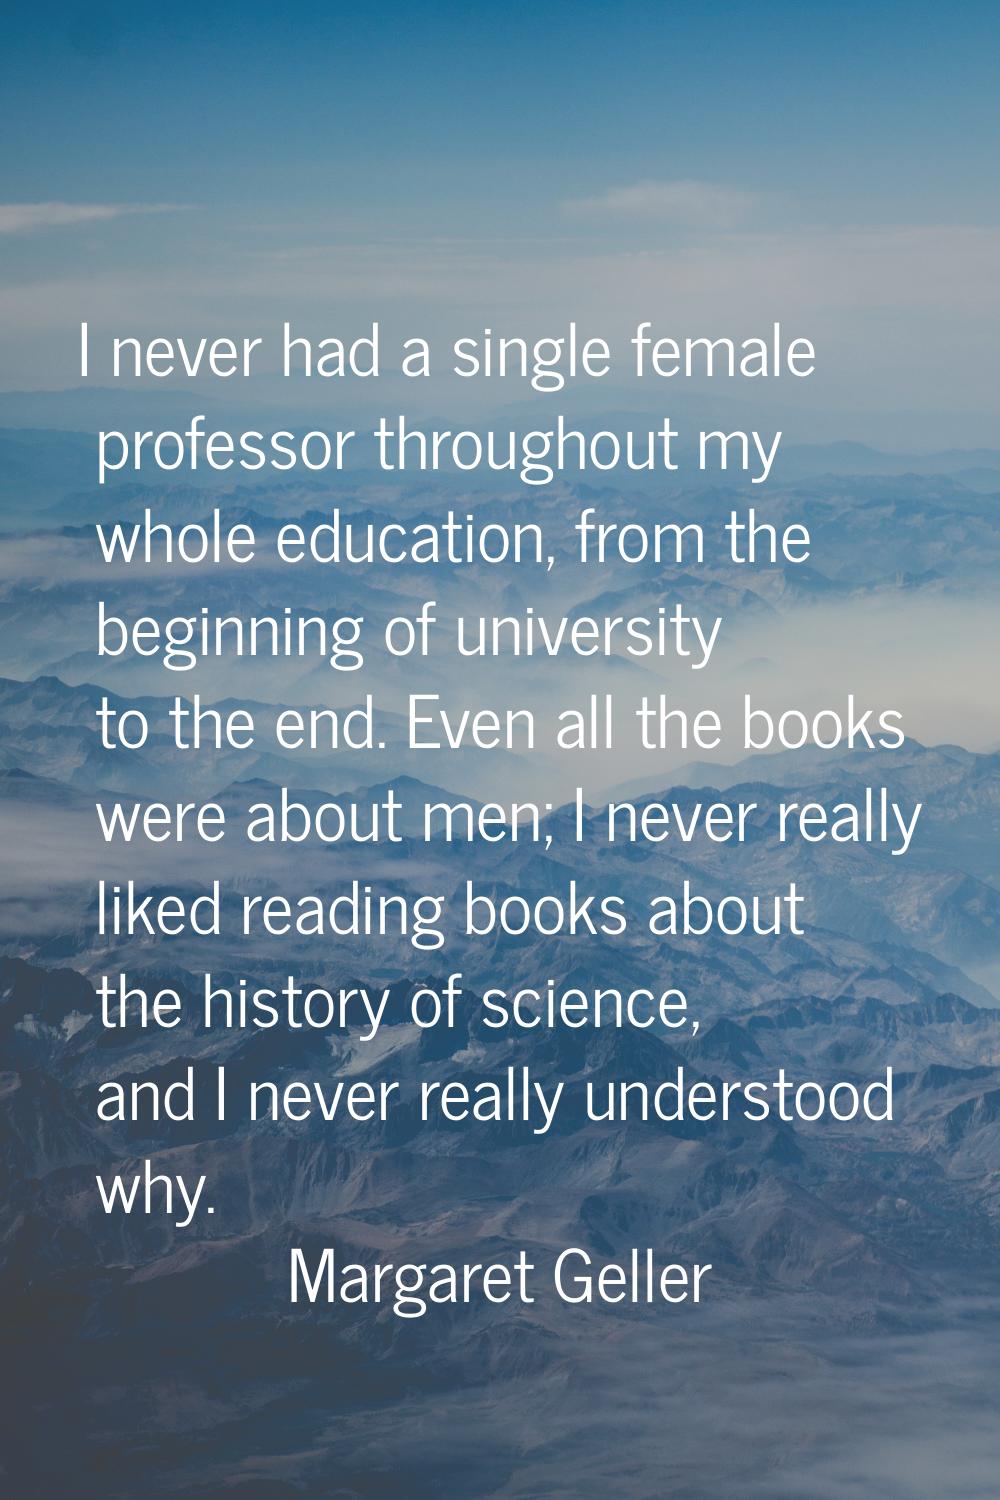 I never had a single female professor throughout my whole education, from the beginning of universi